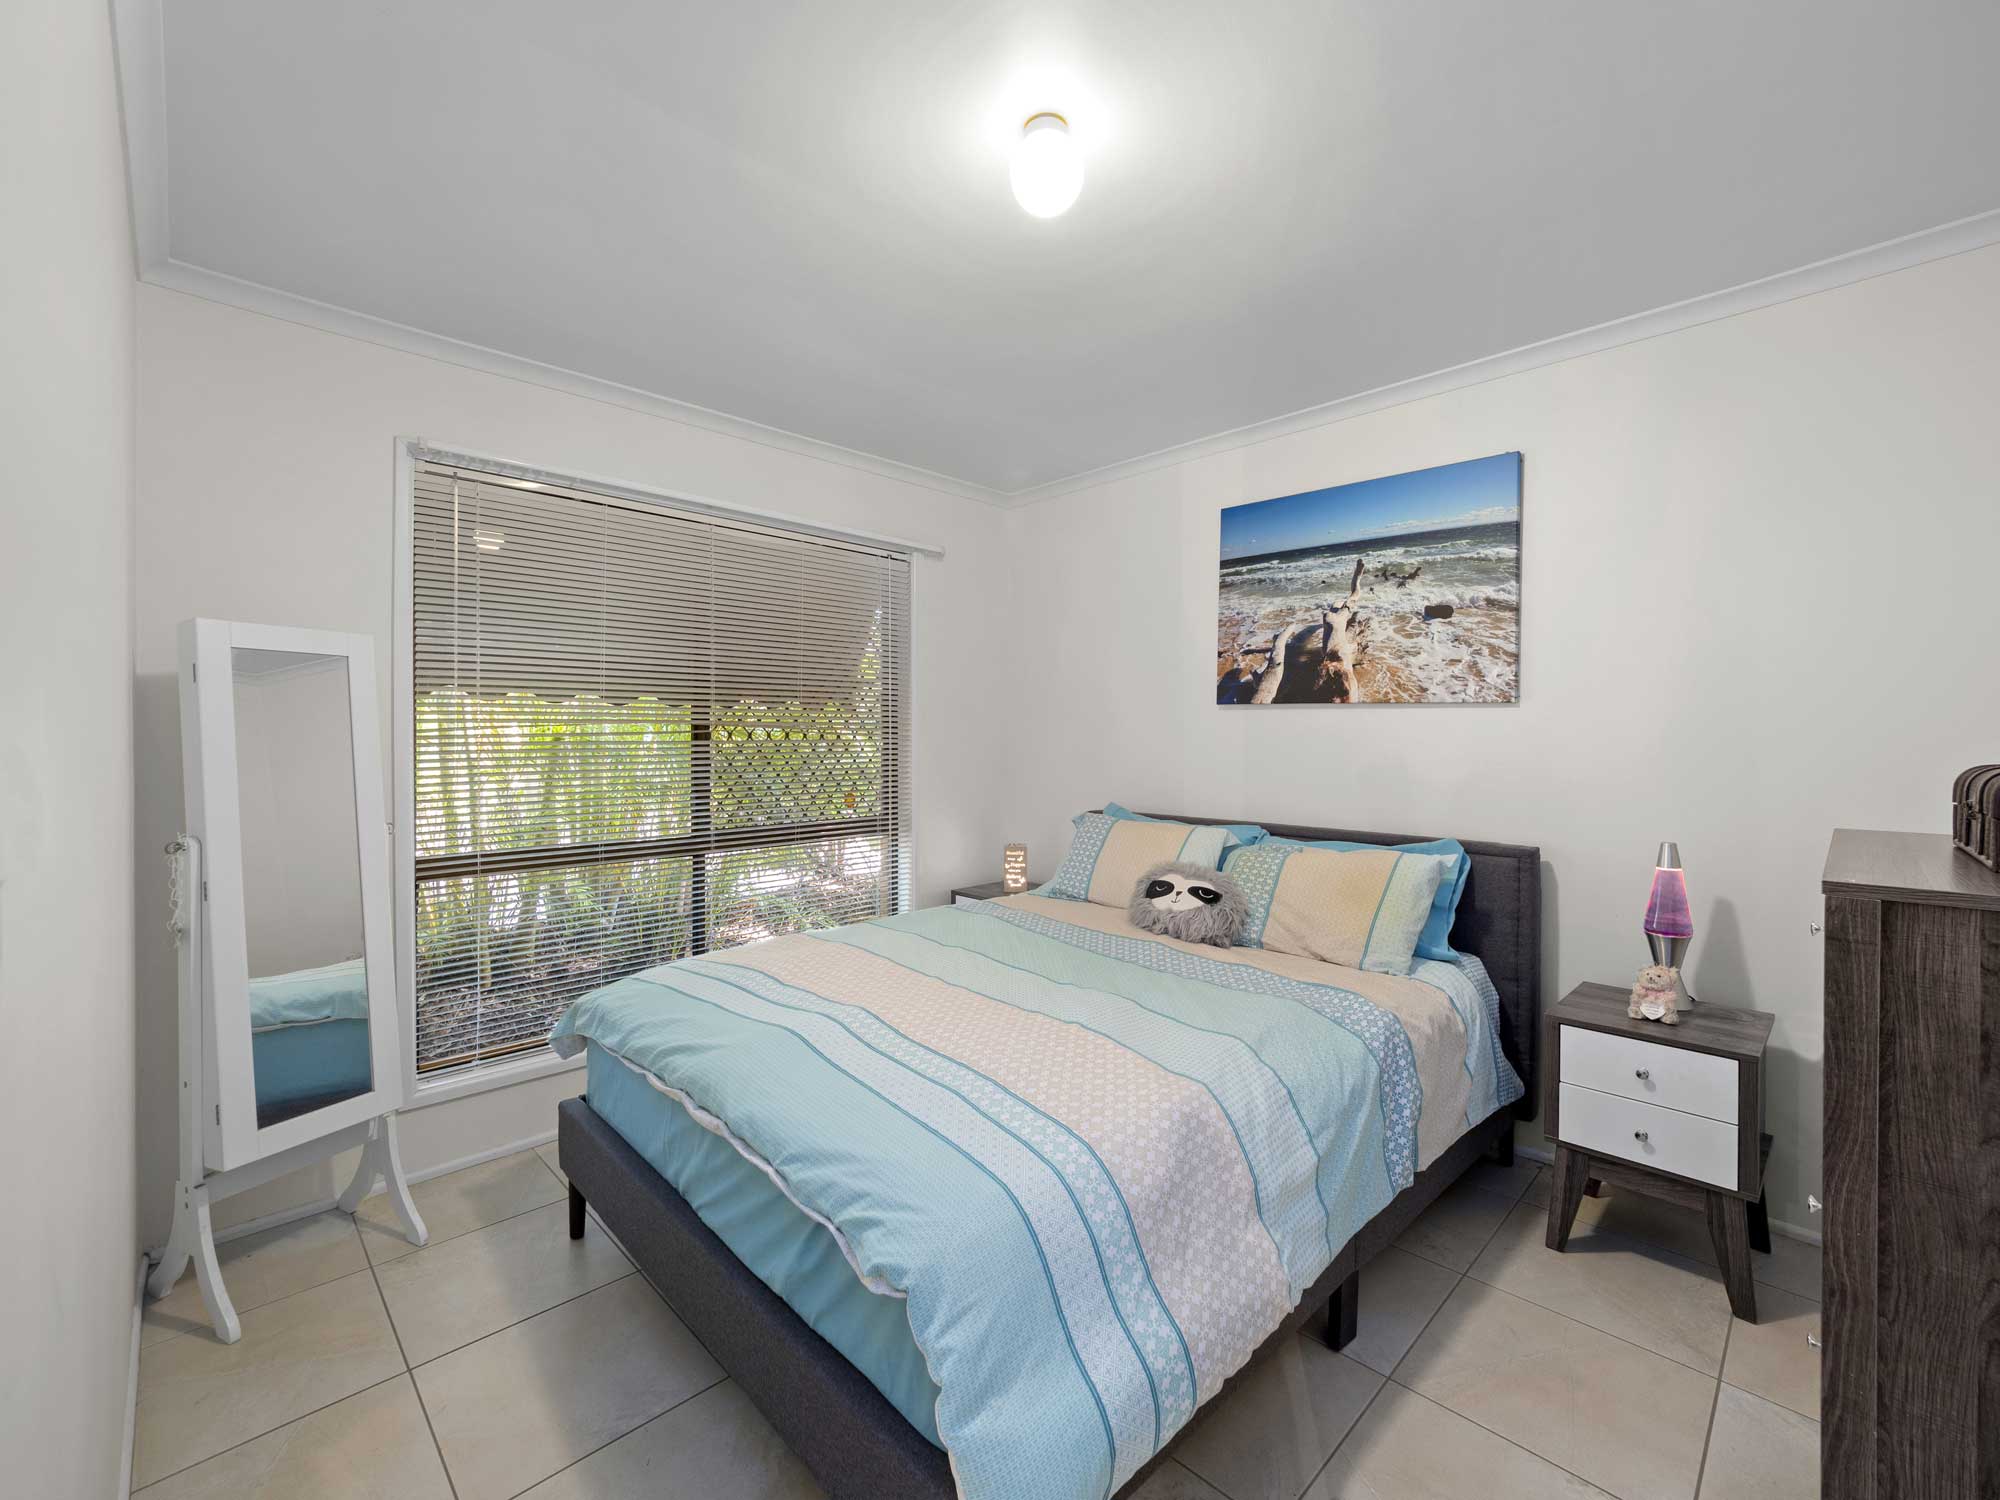 Capturing the master bedroom of the home for sale at Mitchelton